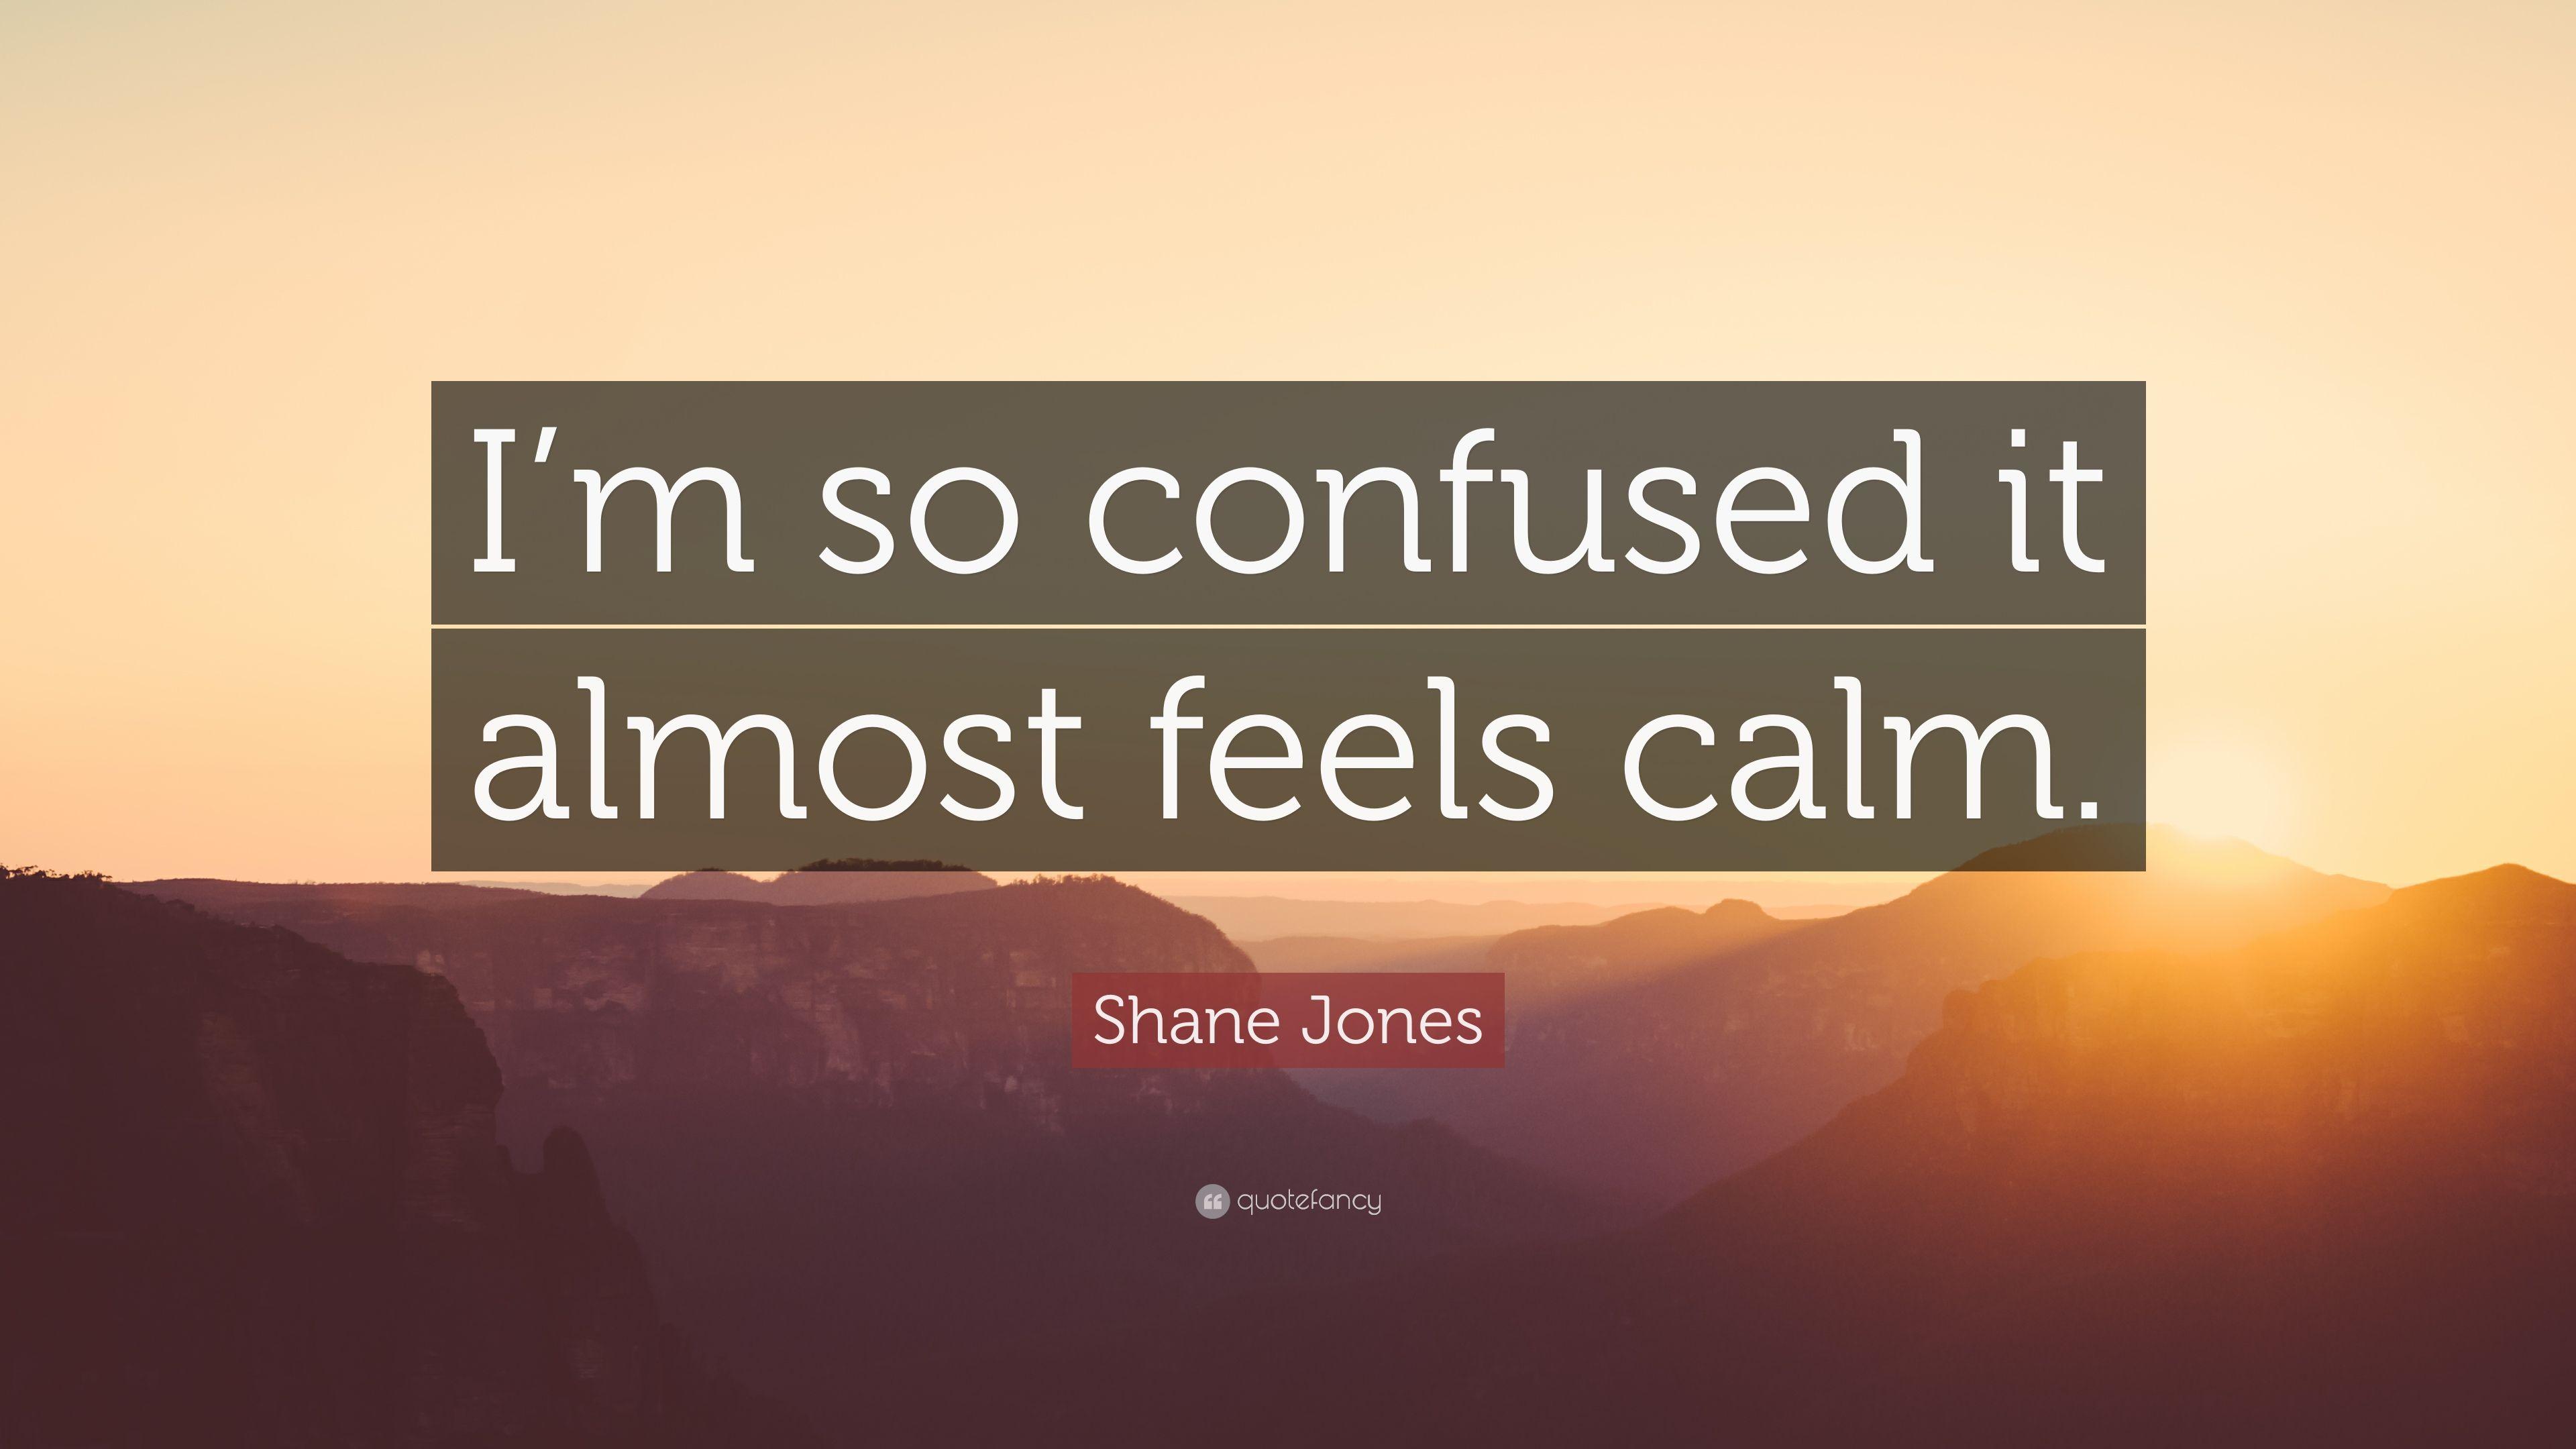 Shane Jones Quote: “I'm so confused it almost feels calm.” 9